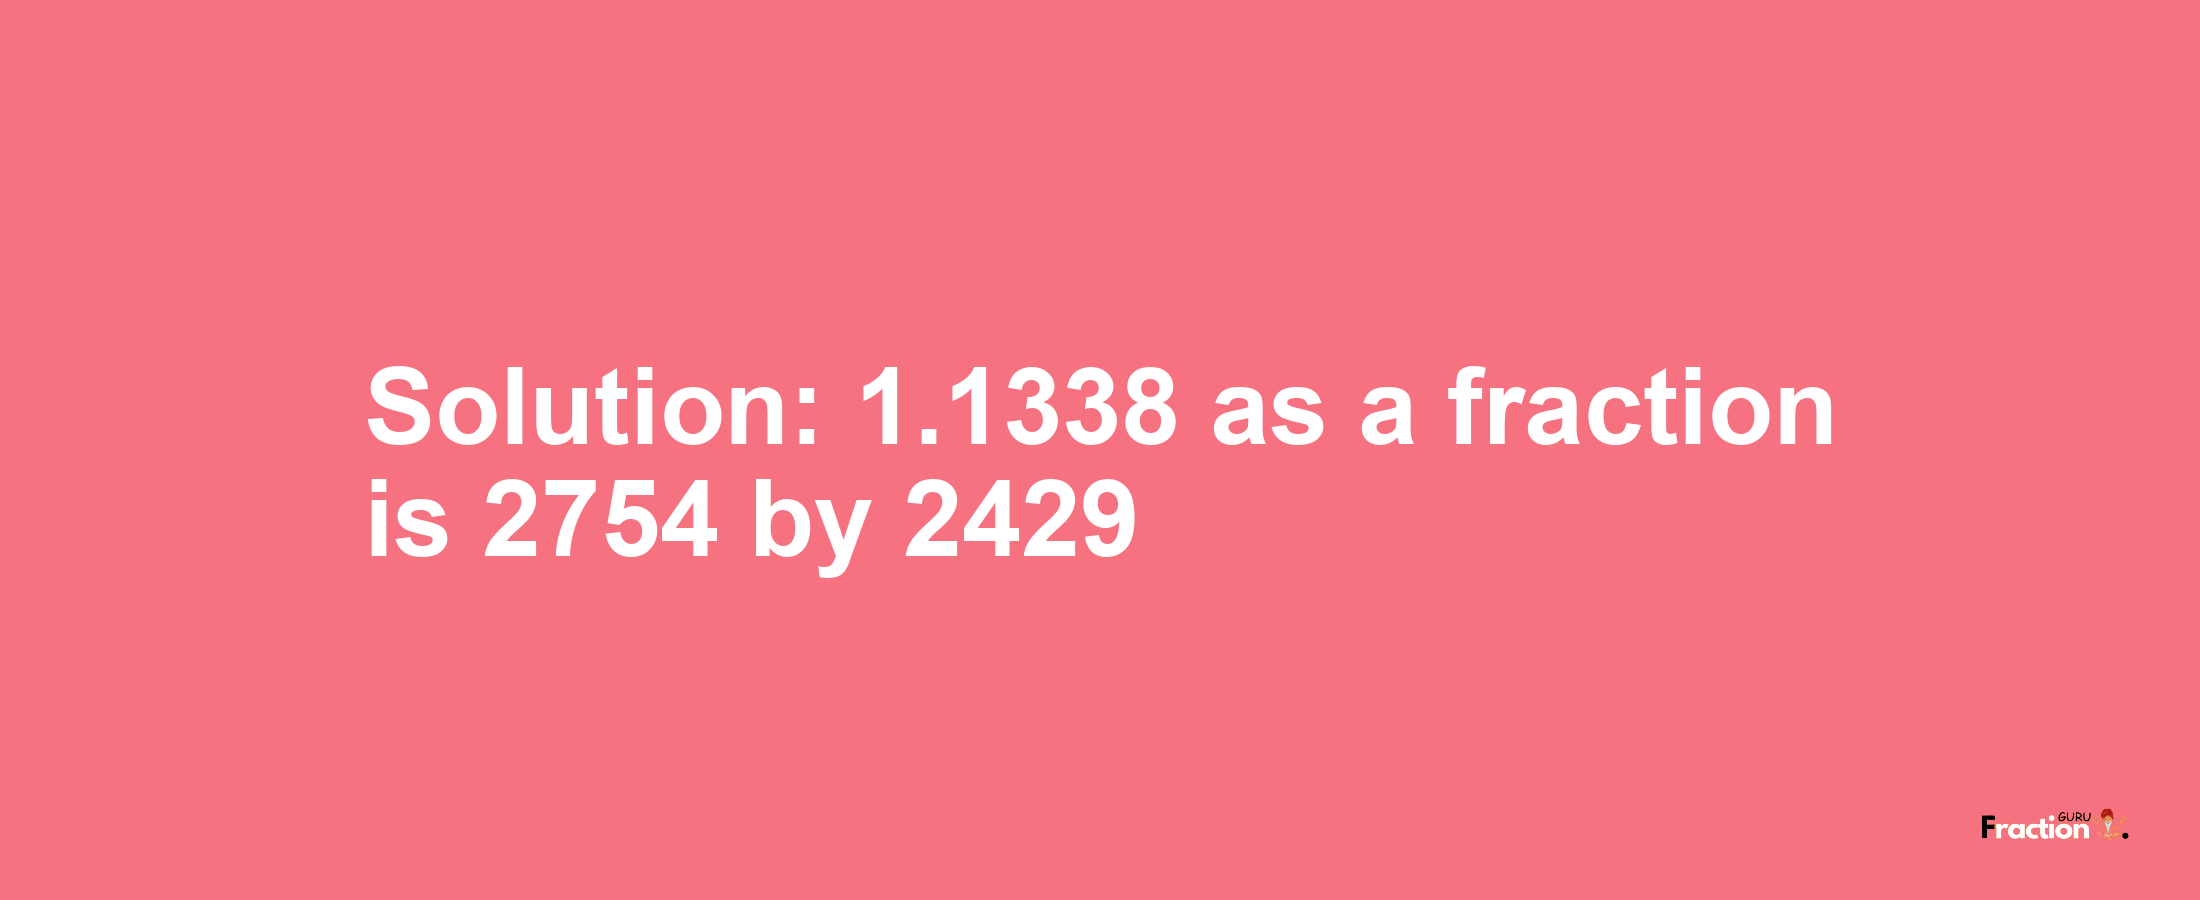 Solution:1.1338 as a fraction is 2754/2429